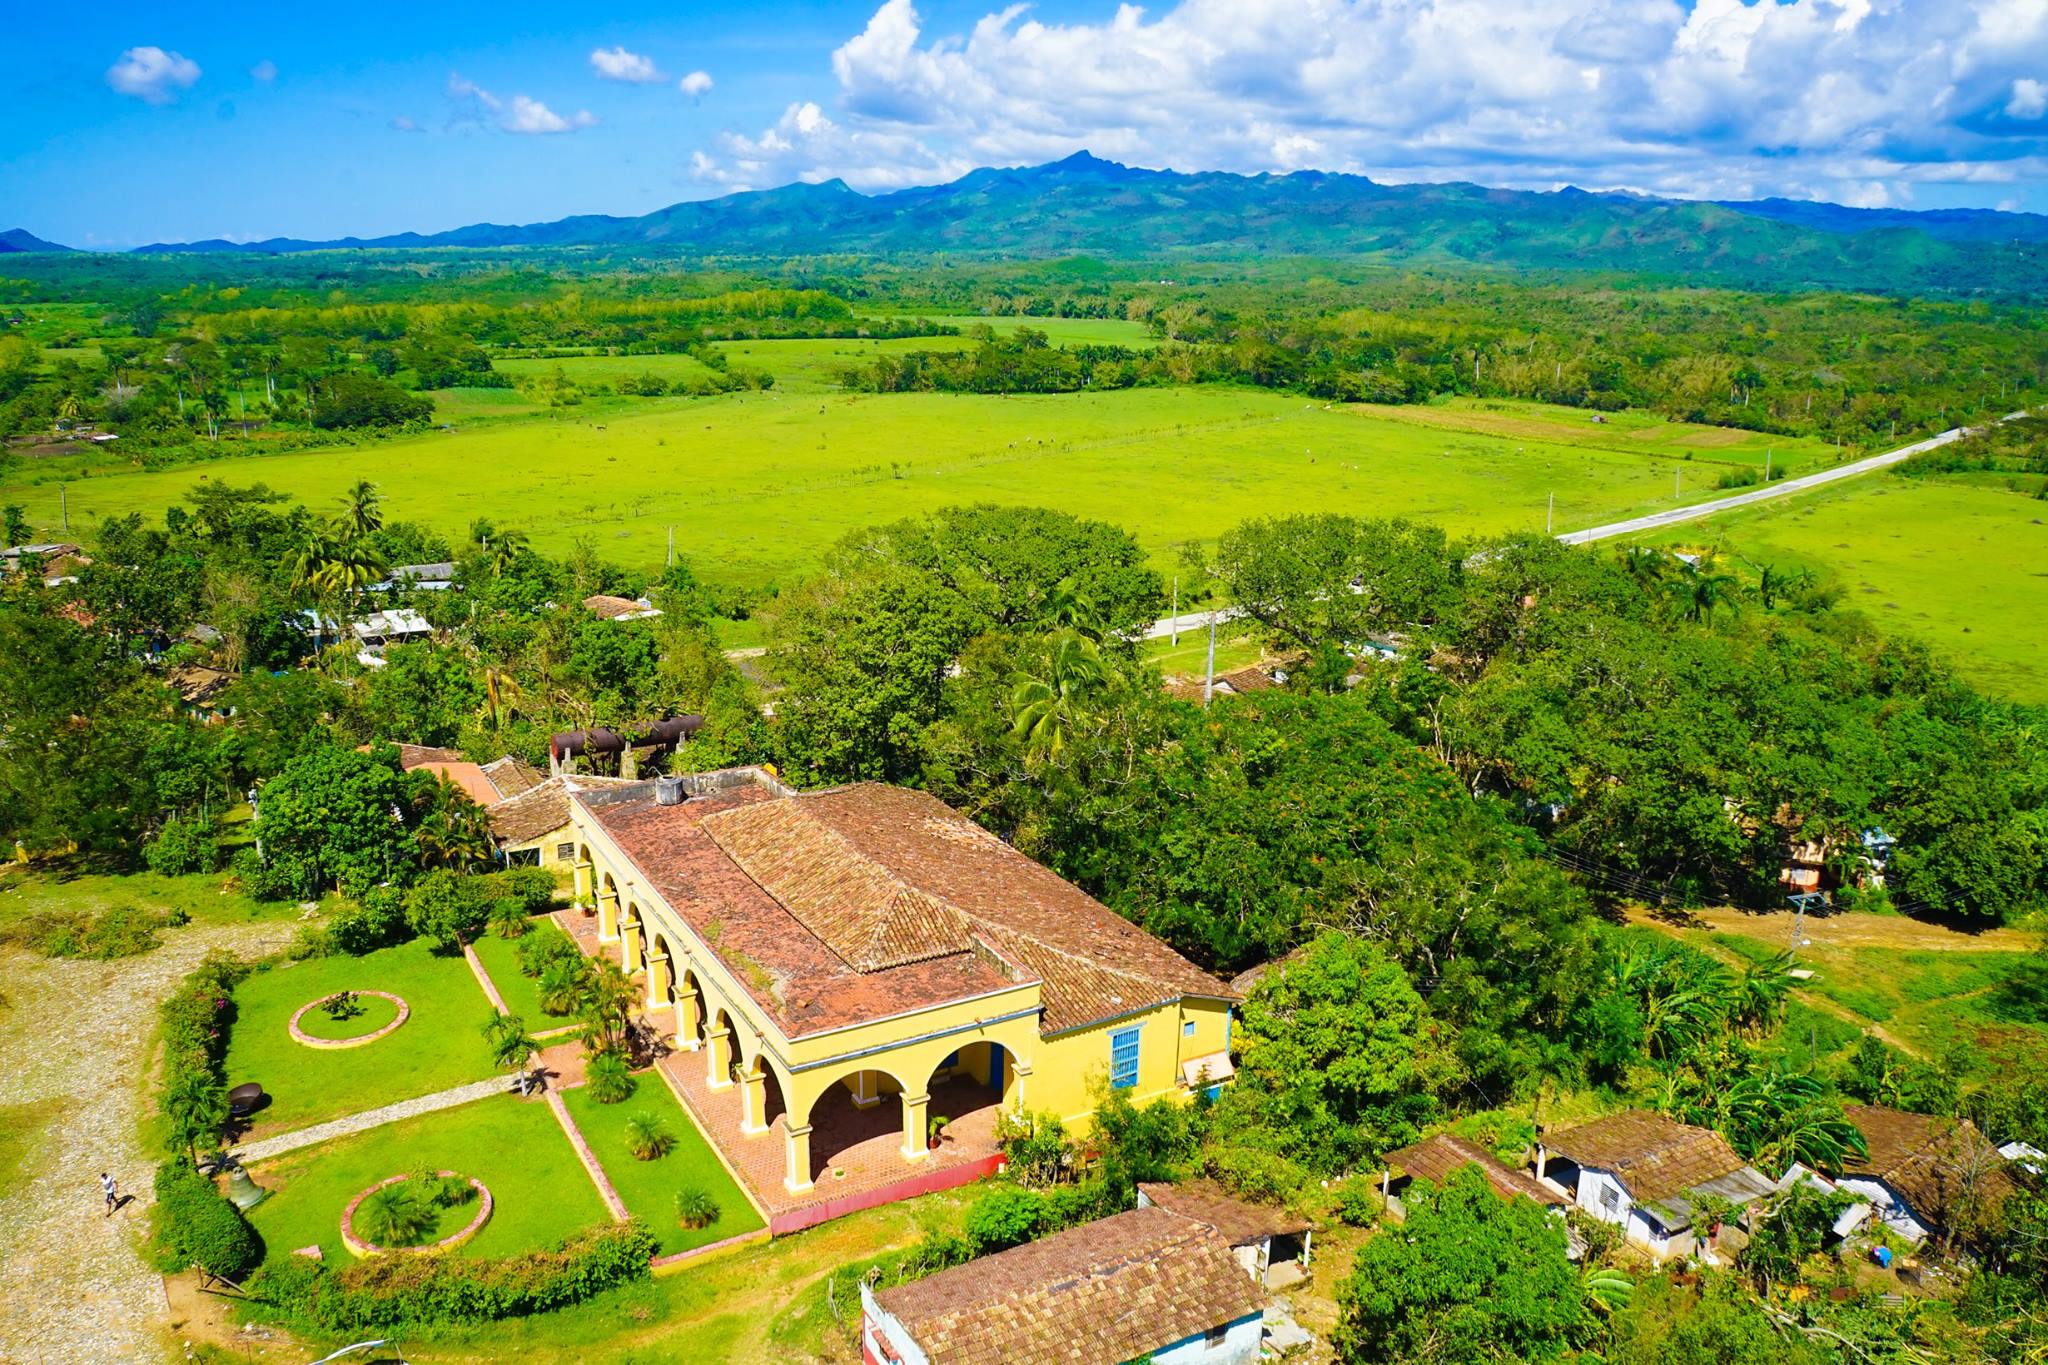 A Guide To The 9 UNESCO World Heritage Sites In Cuba!